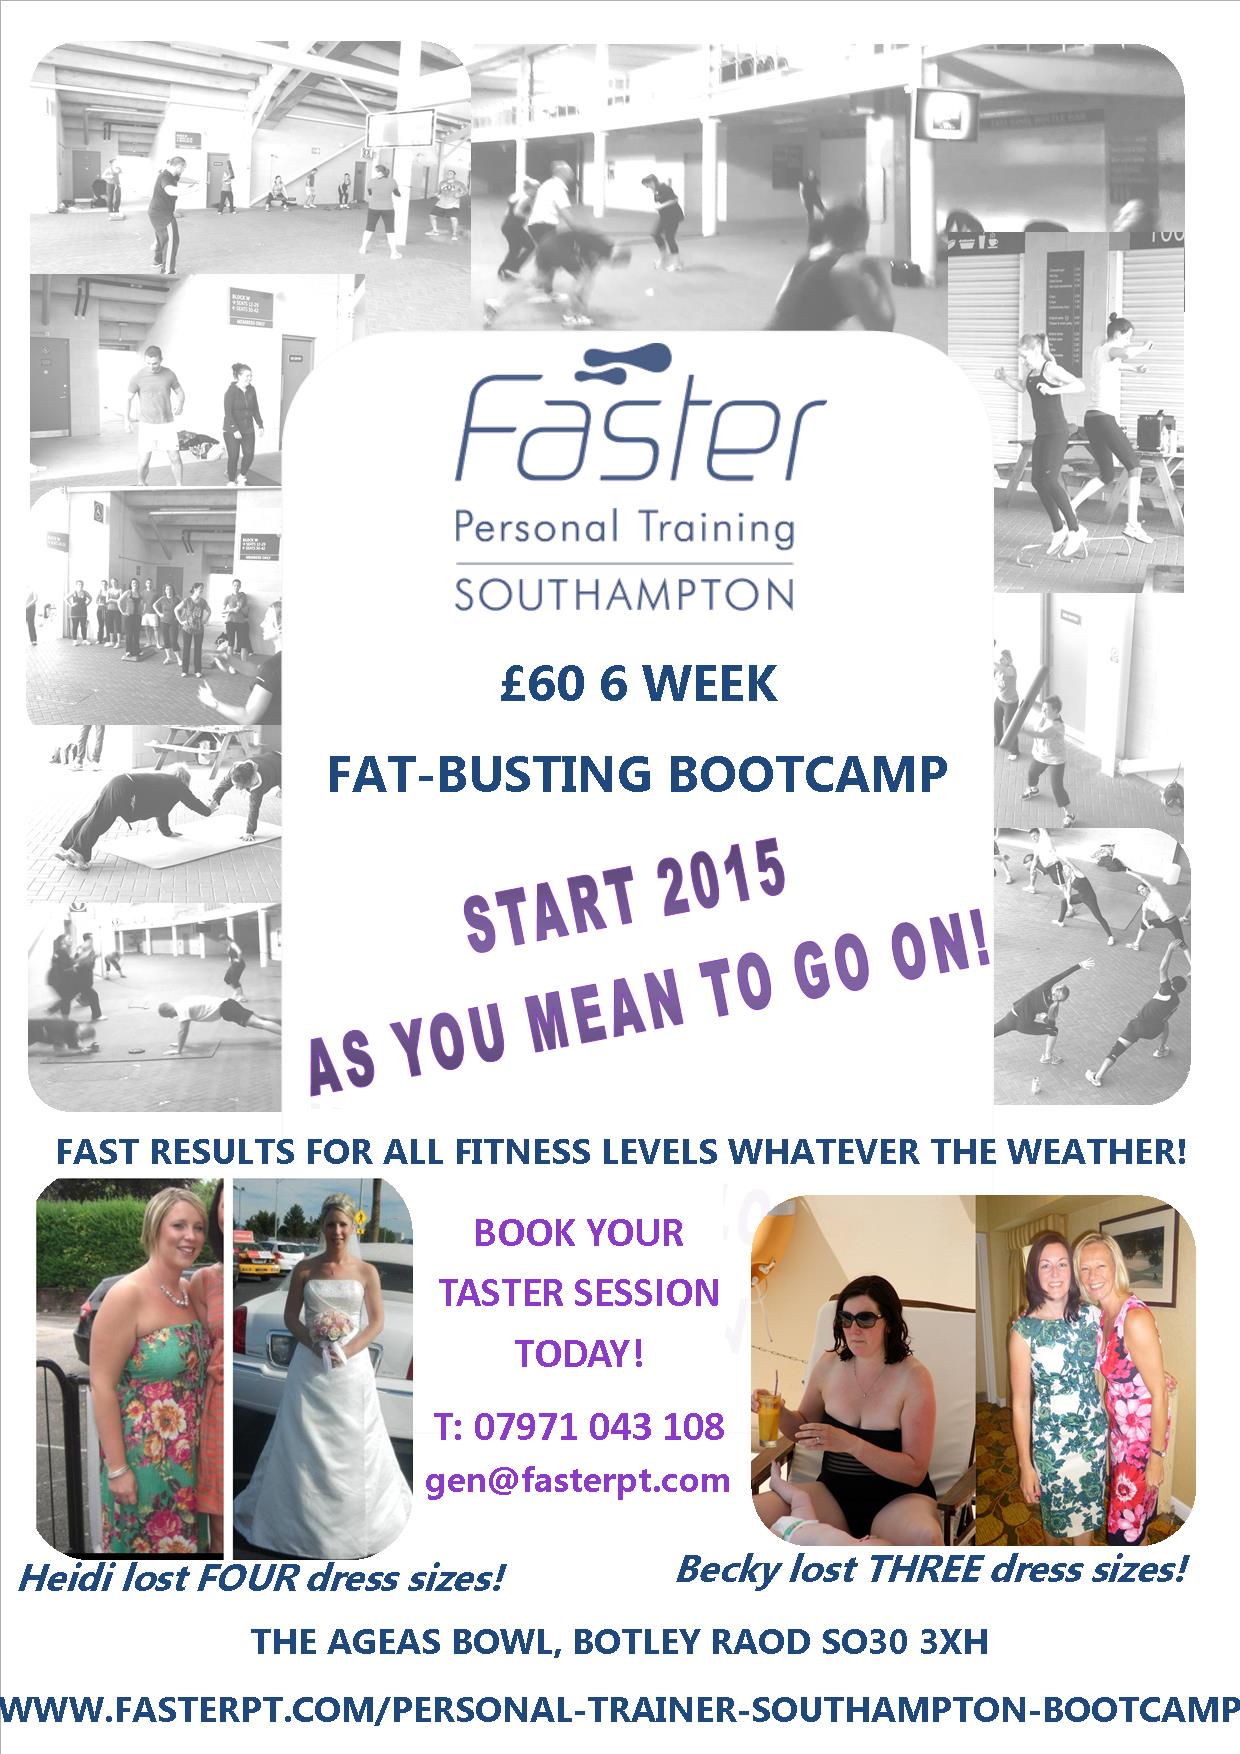 Faster boot camp southampton